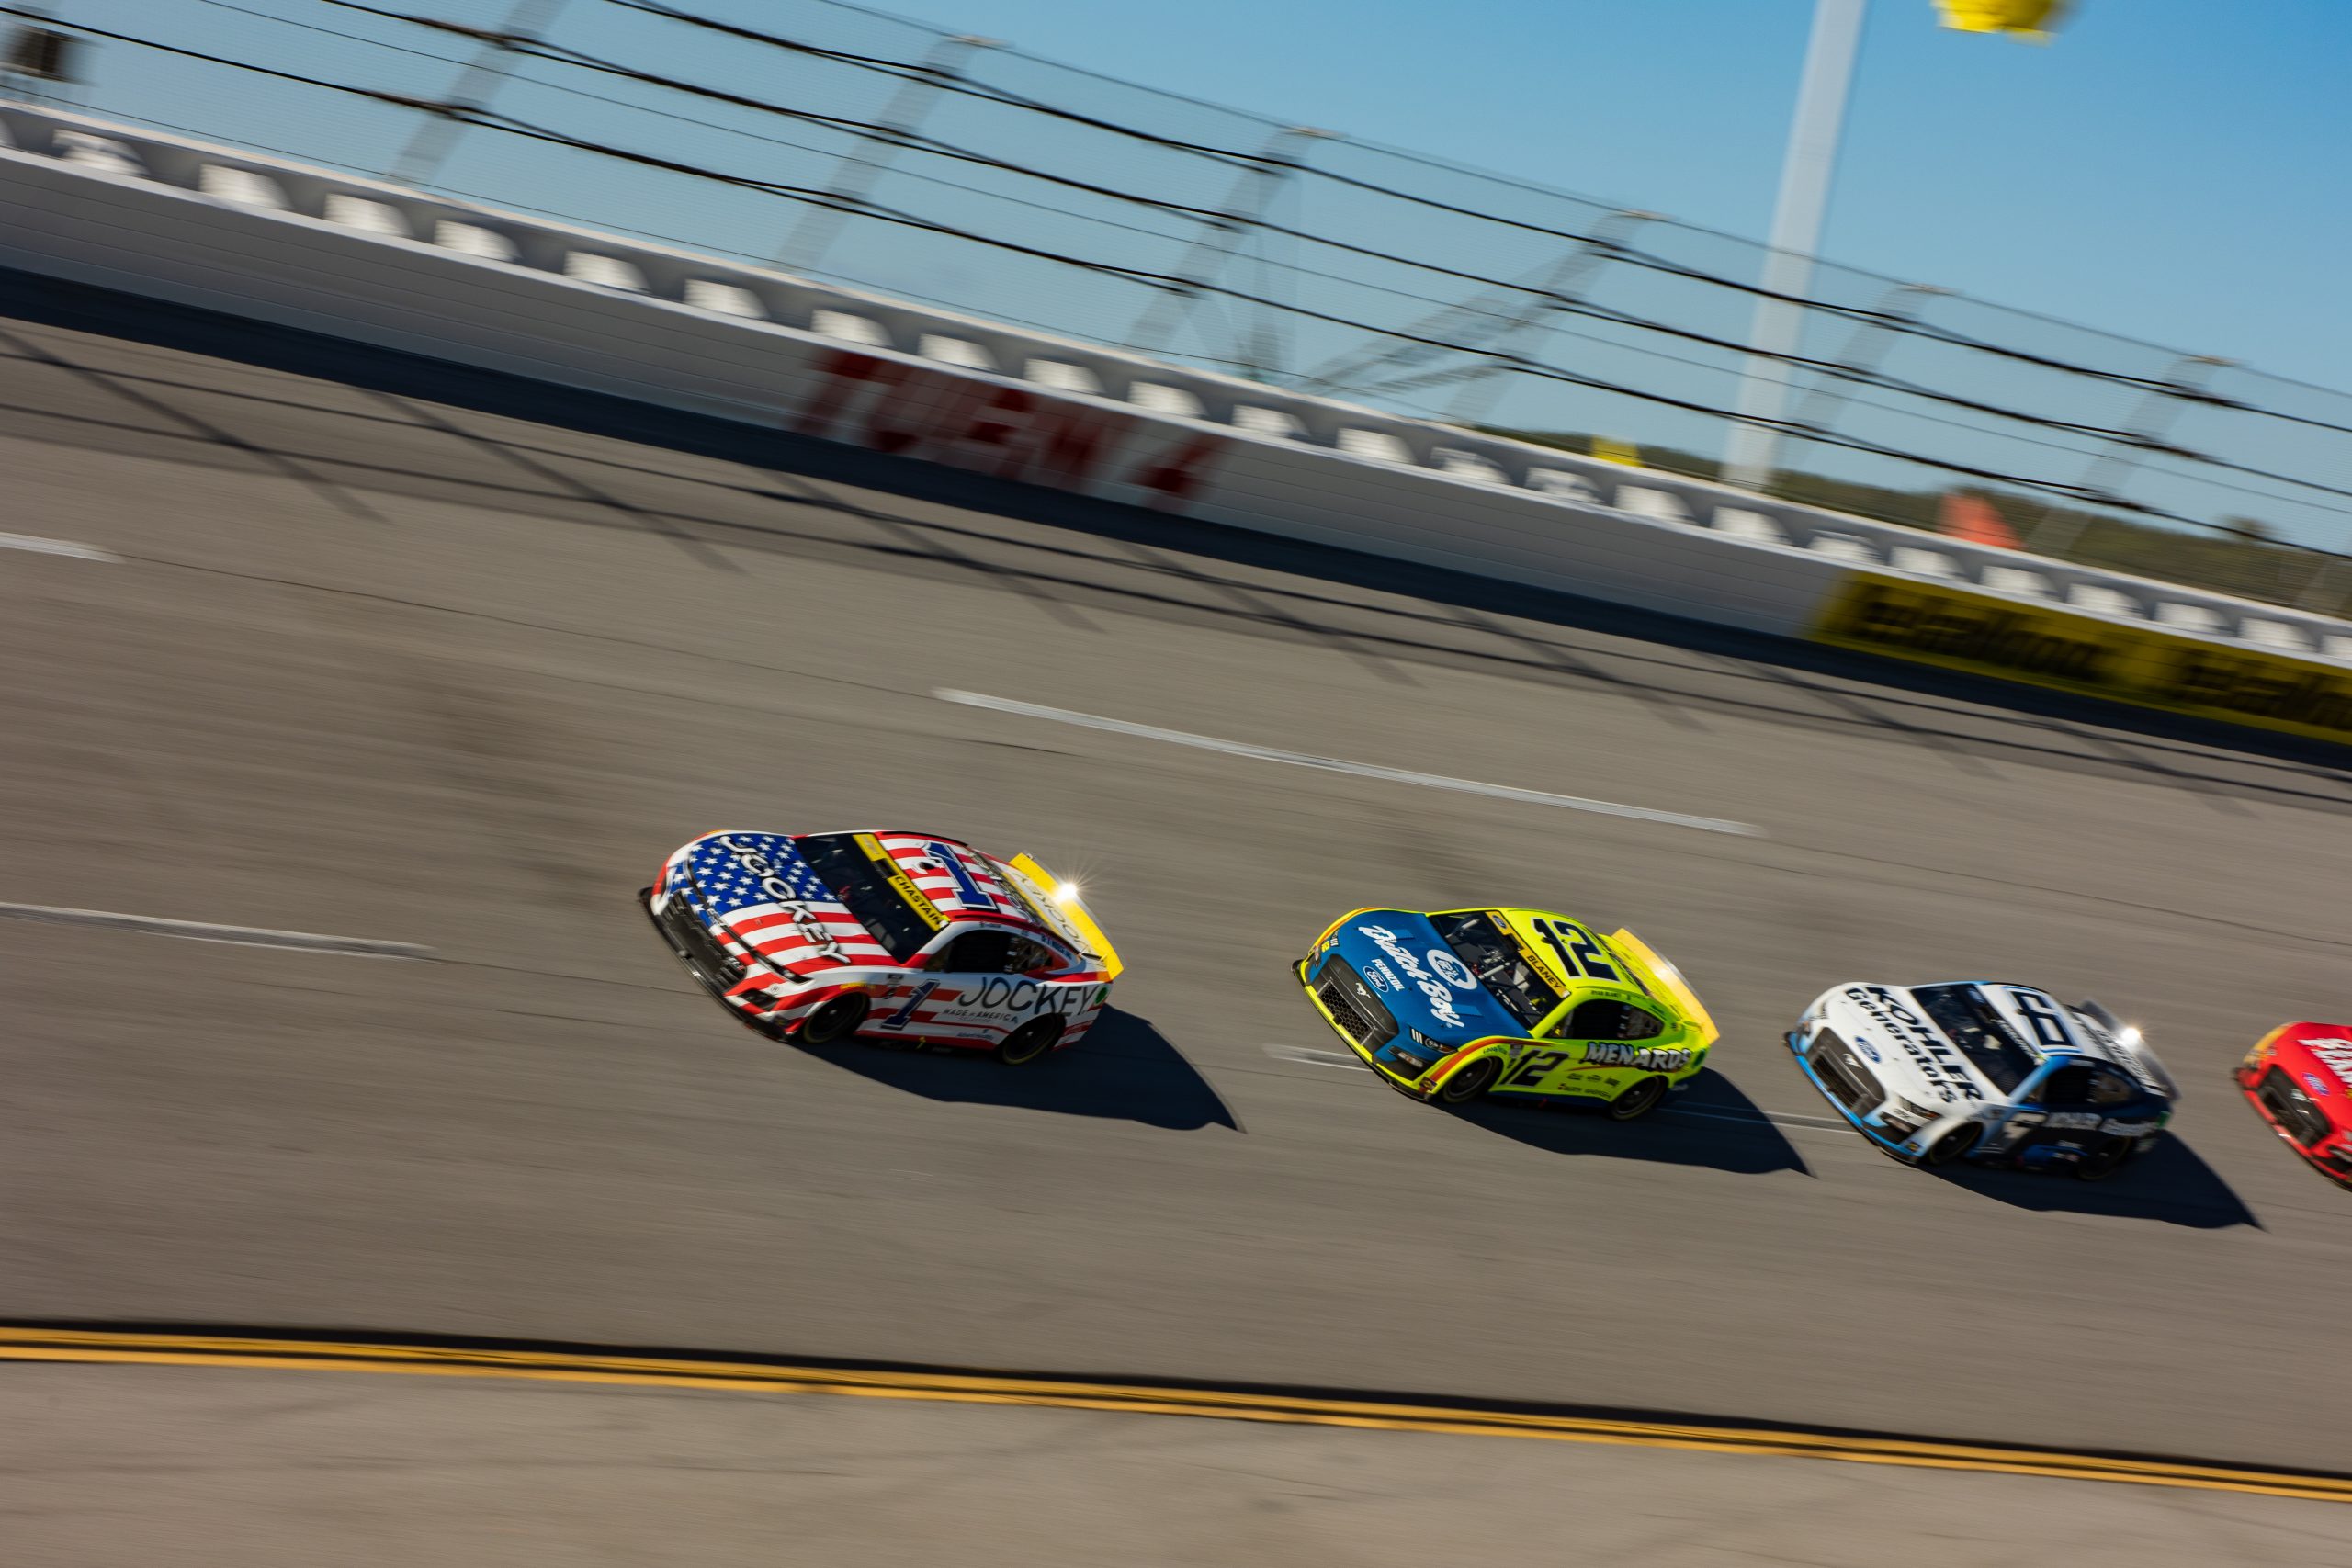 Chastain's patriotic paint scheme led the way for 36 laps at Talladega. (Photo: Riley Thompson | The Podium Finish)